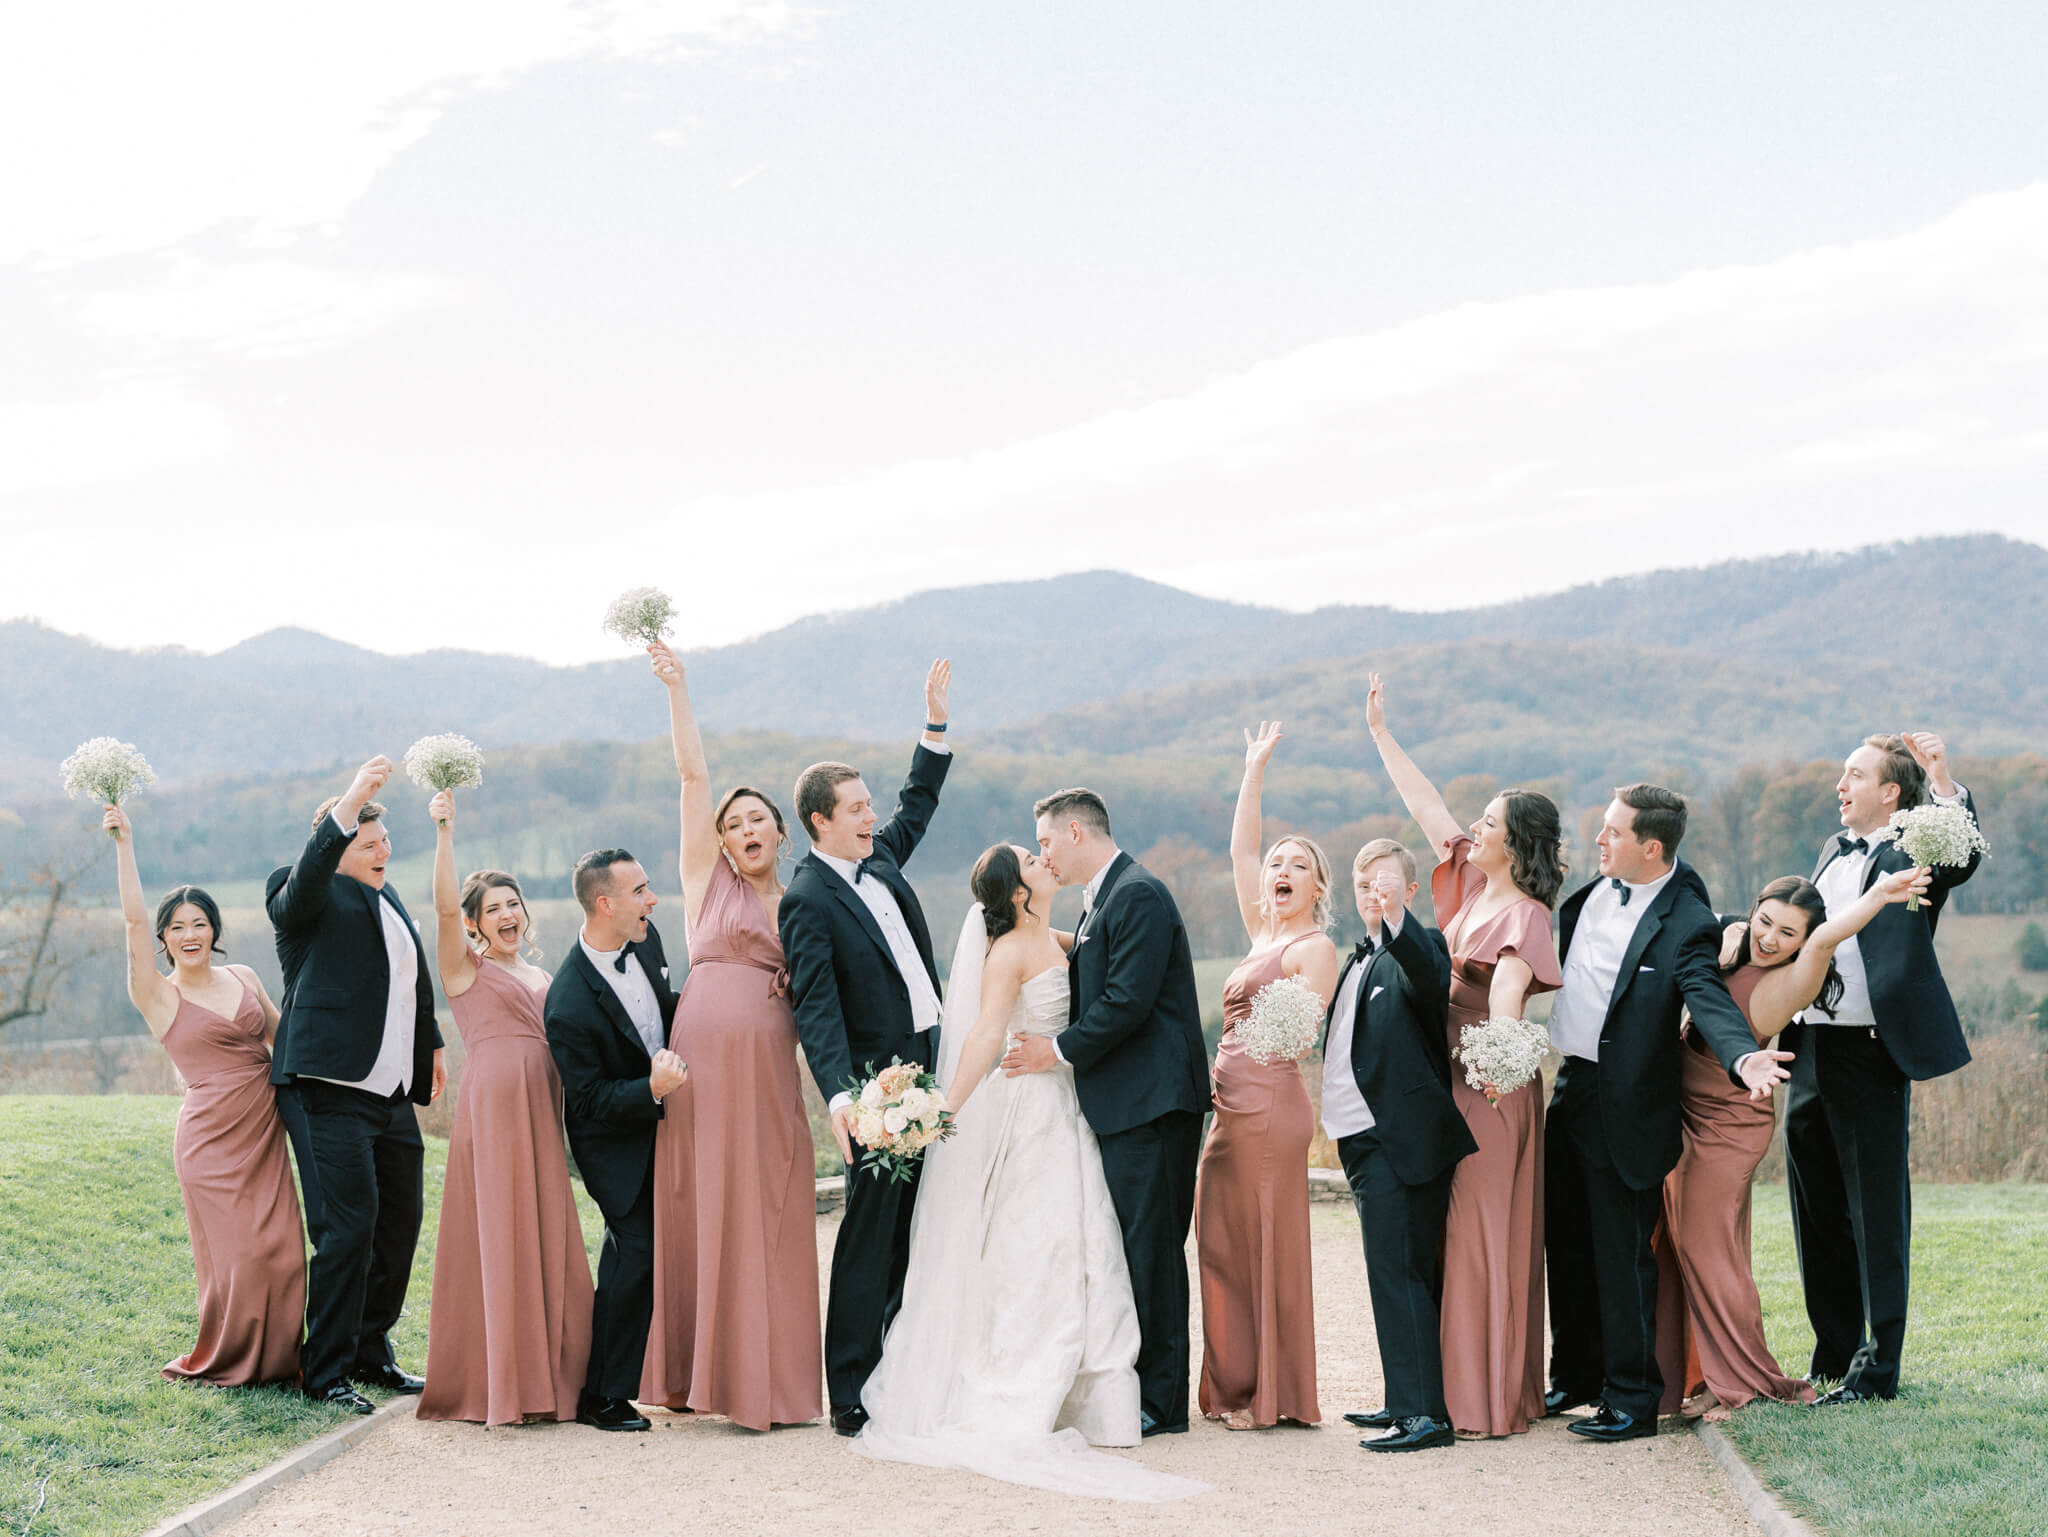 An intermingled wedding party, wearing mauve dresses and black suits, cheering for the bride and groom who are kissing in the middle.